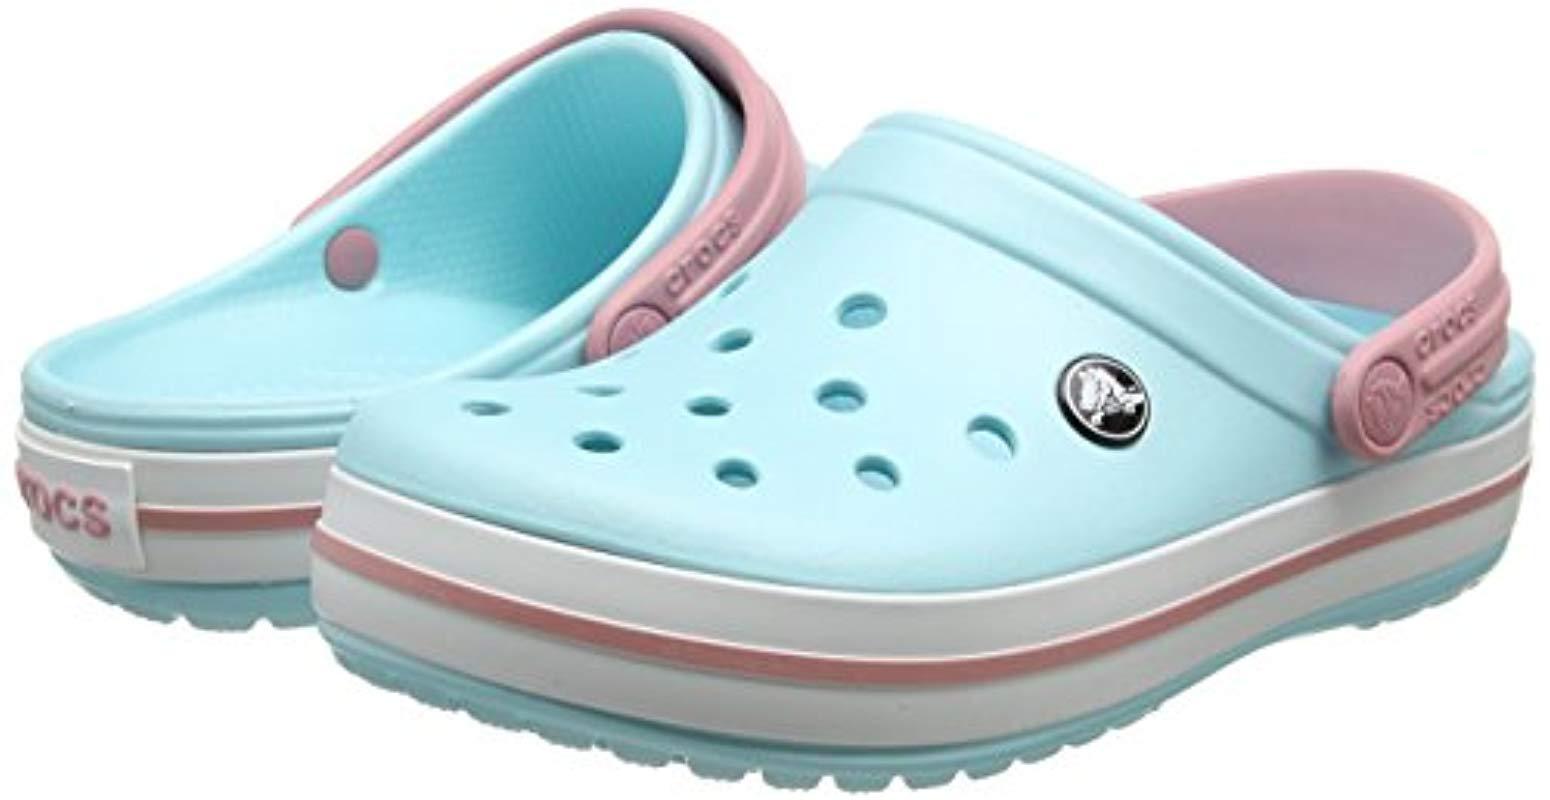 ice blue and white crocs